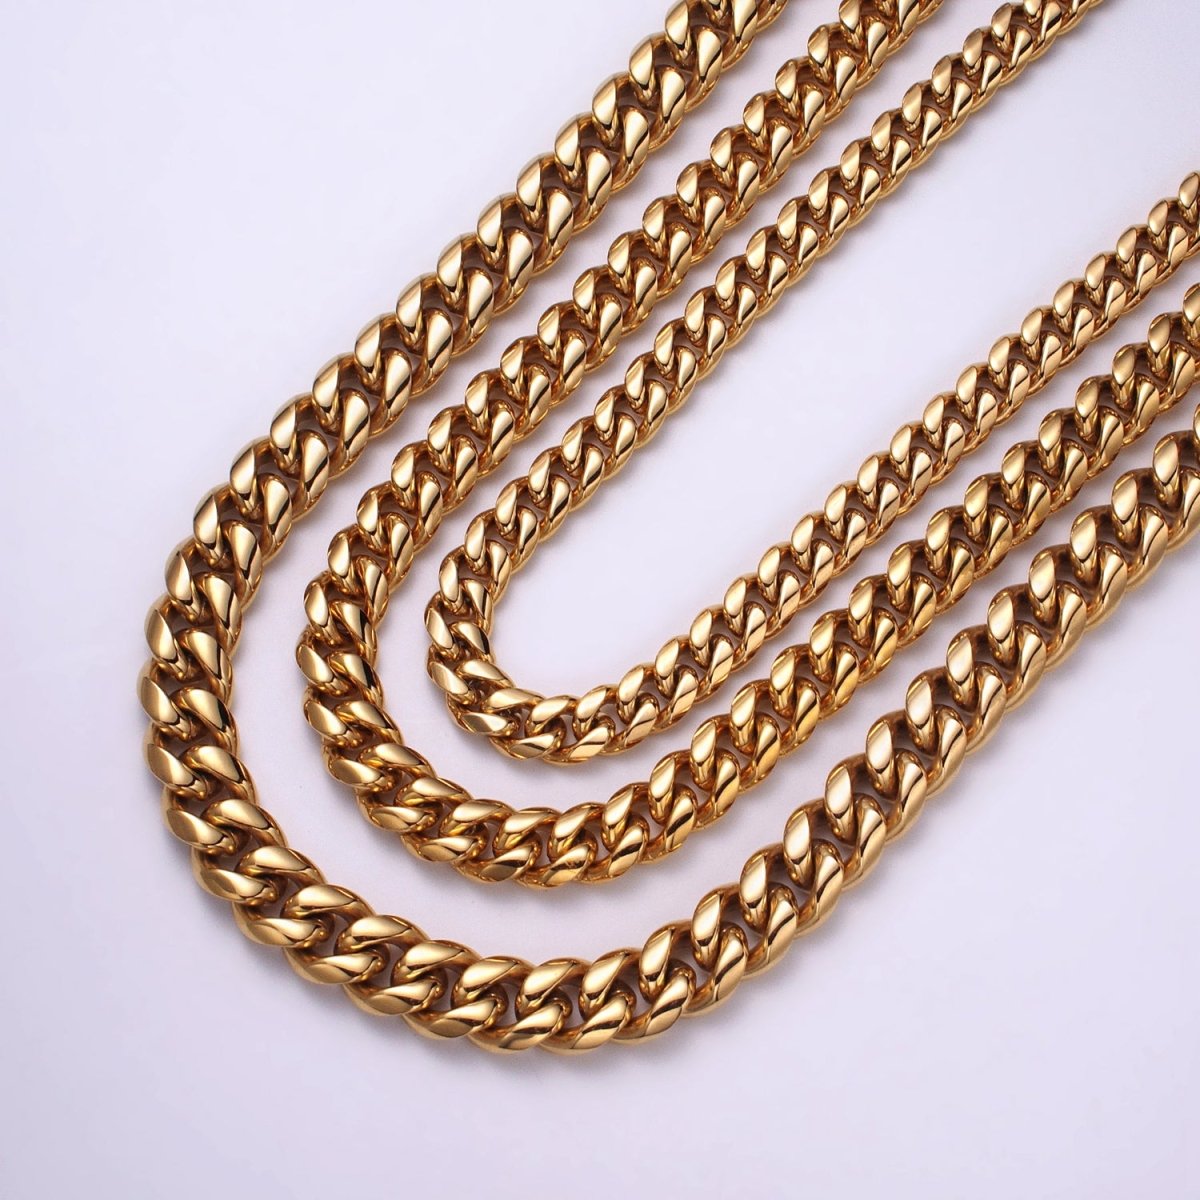 Gold Curb Chain Cuban Necklace for Men - Heavy Stainless Steel 10 12 14 mm Thickness 24.5 inch long WA-1726 WA-1727 WA-1728 Clearance Pricing - DLUXCA